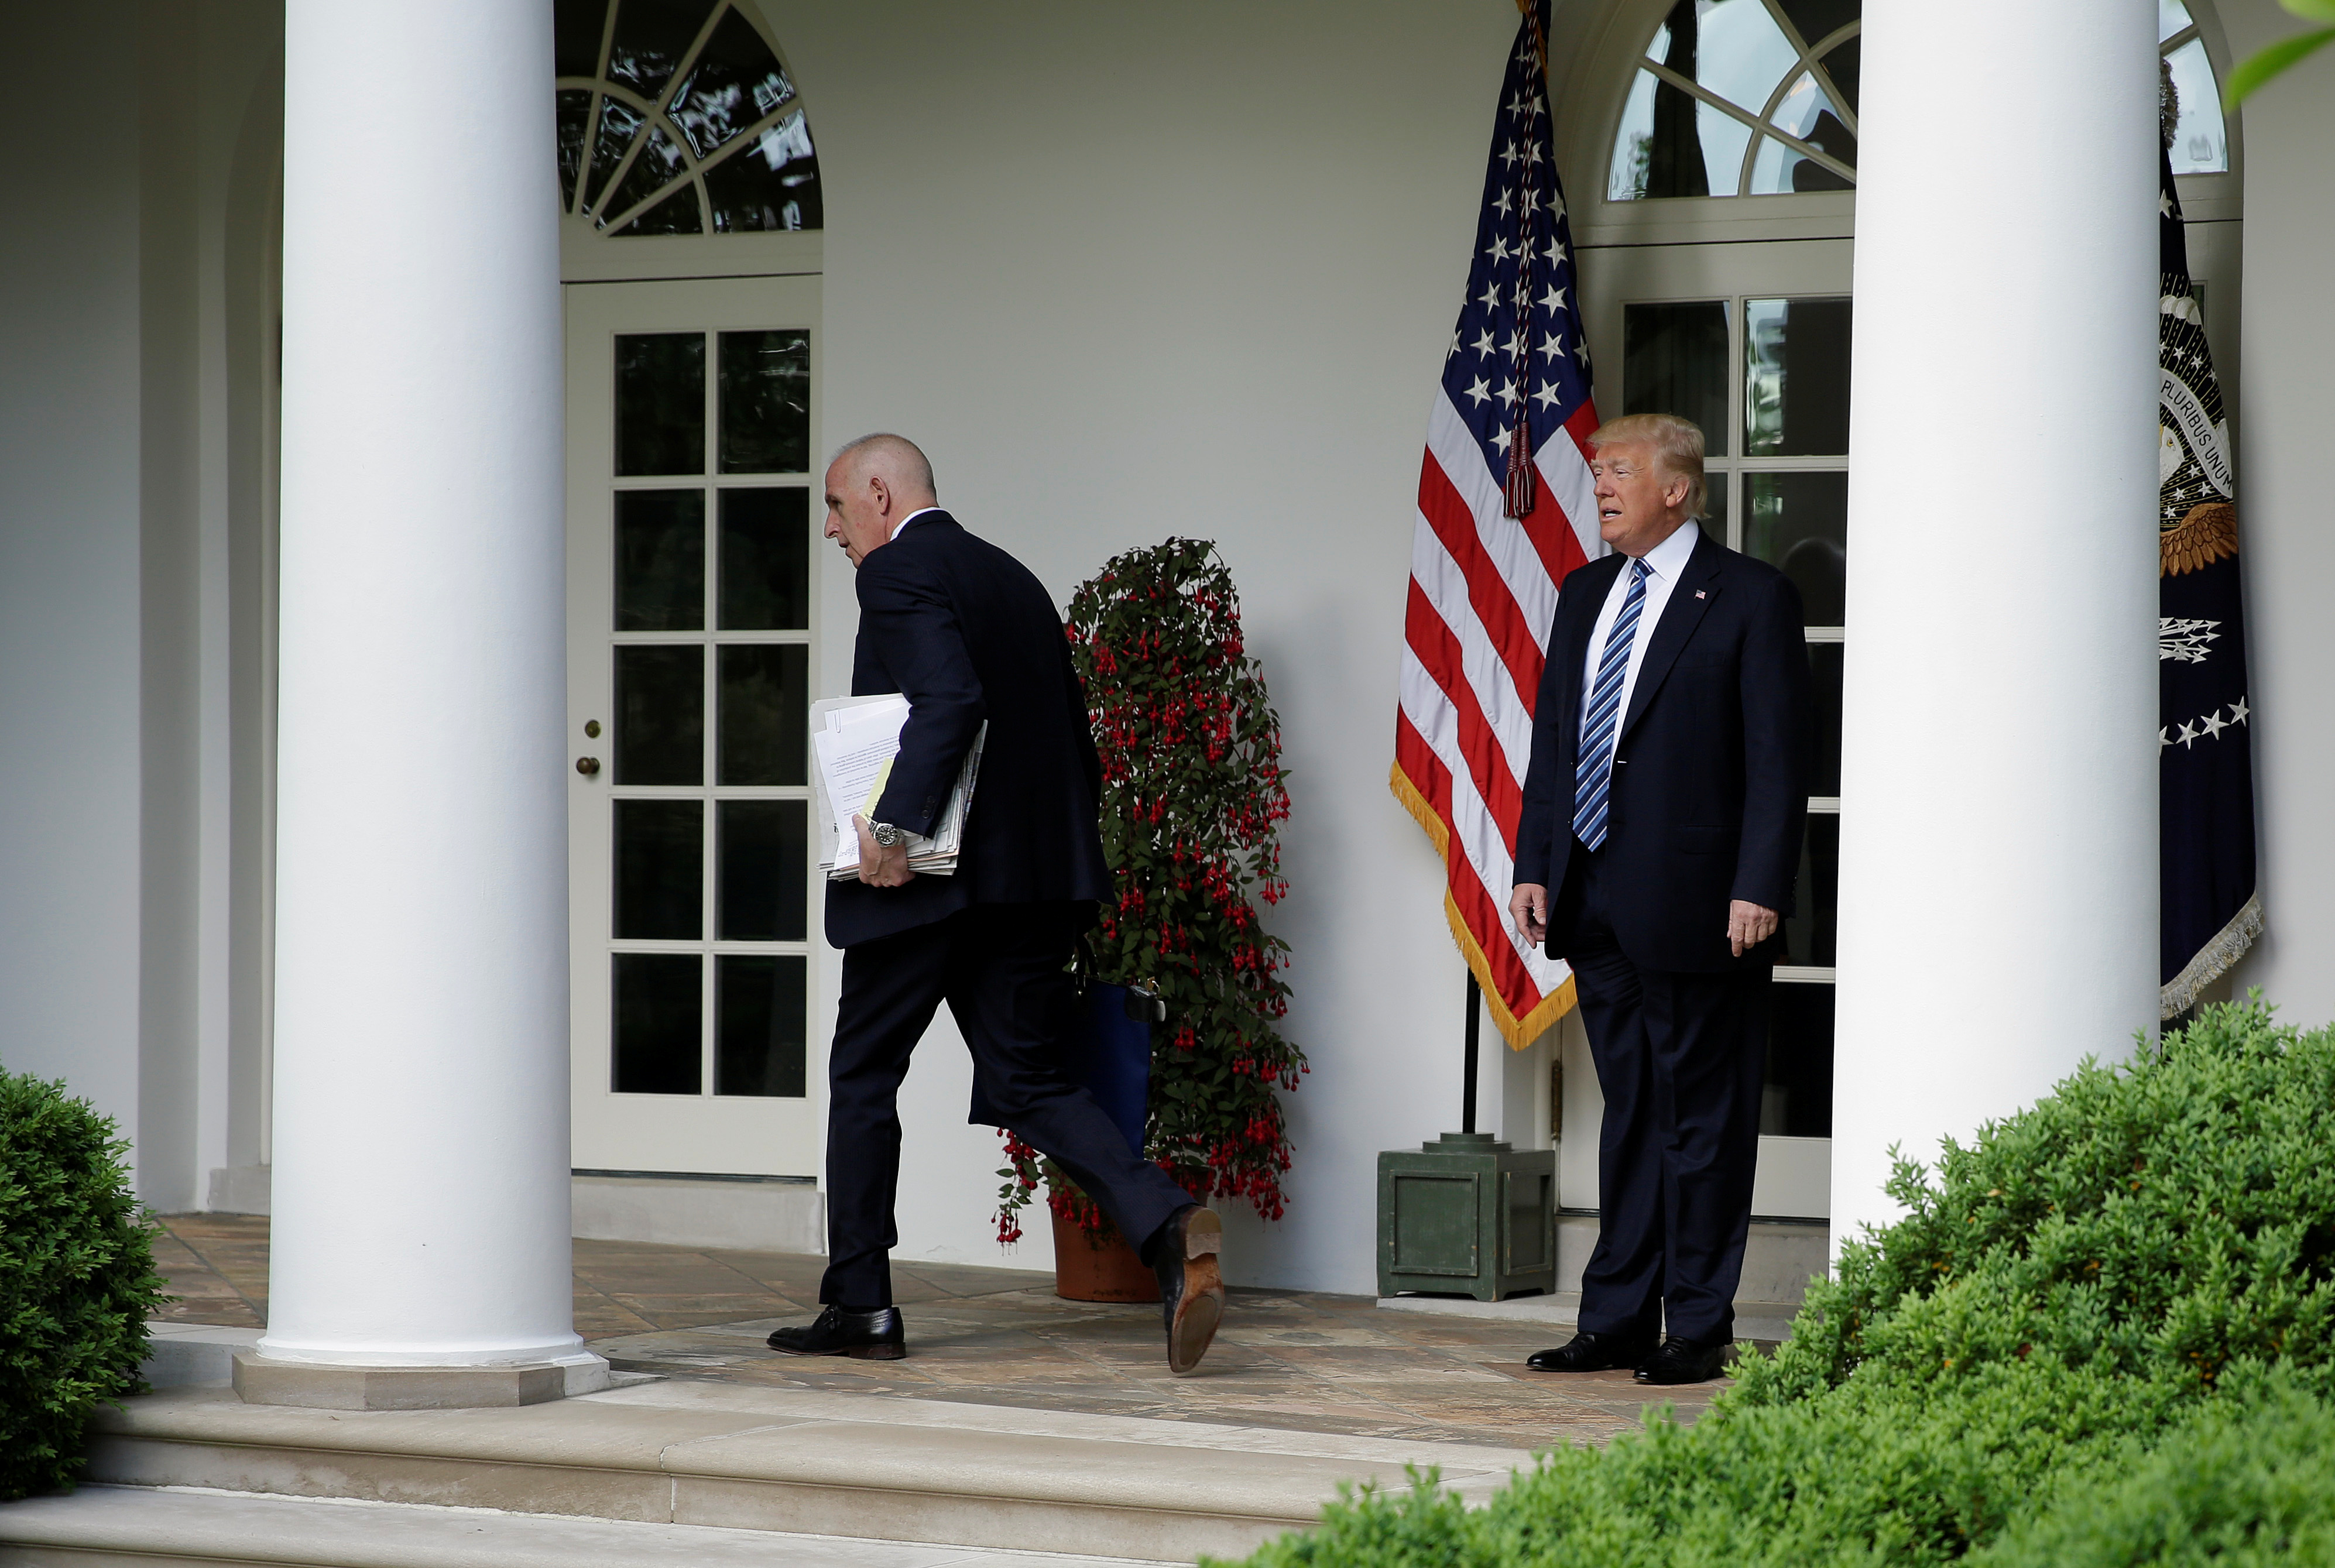 Keith Schiller, deputy assistant to the President and director of Oval Office operations, and U.S. President Donald Trump walk to the Oval Office of the White House in Washington, U.S., May 2, 2017. REUTERS/Joshua Roberts